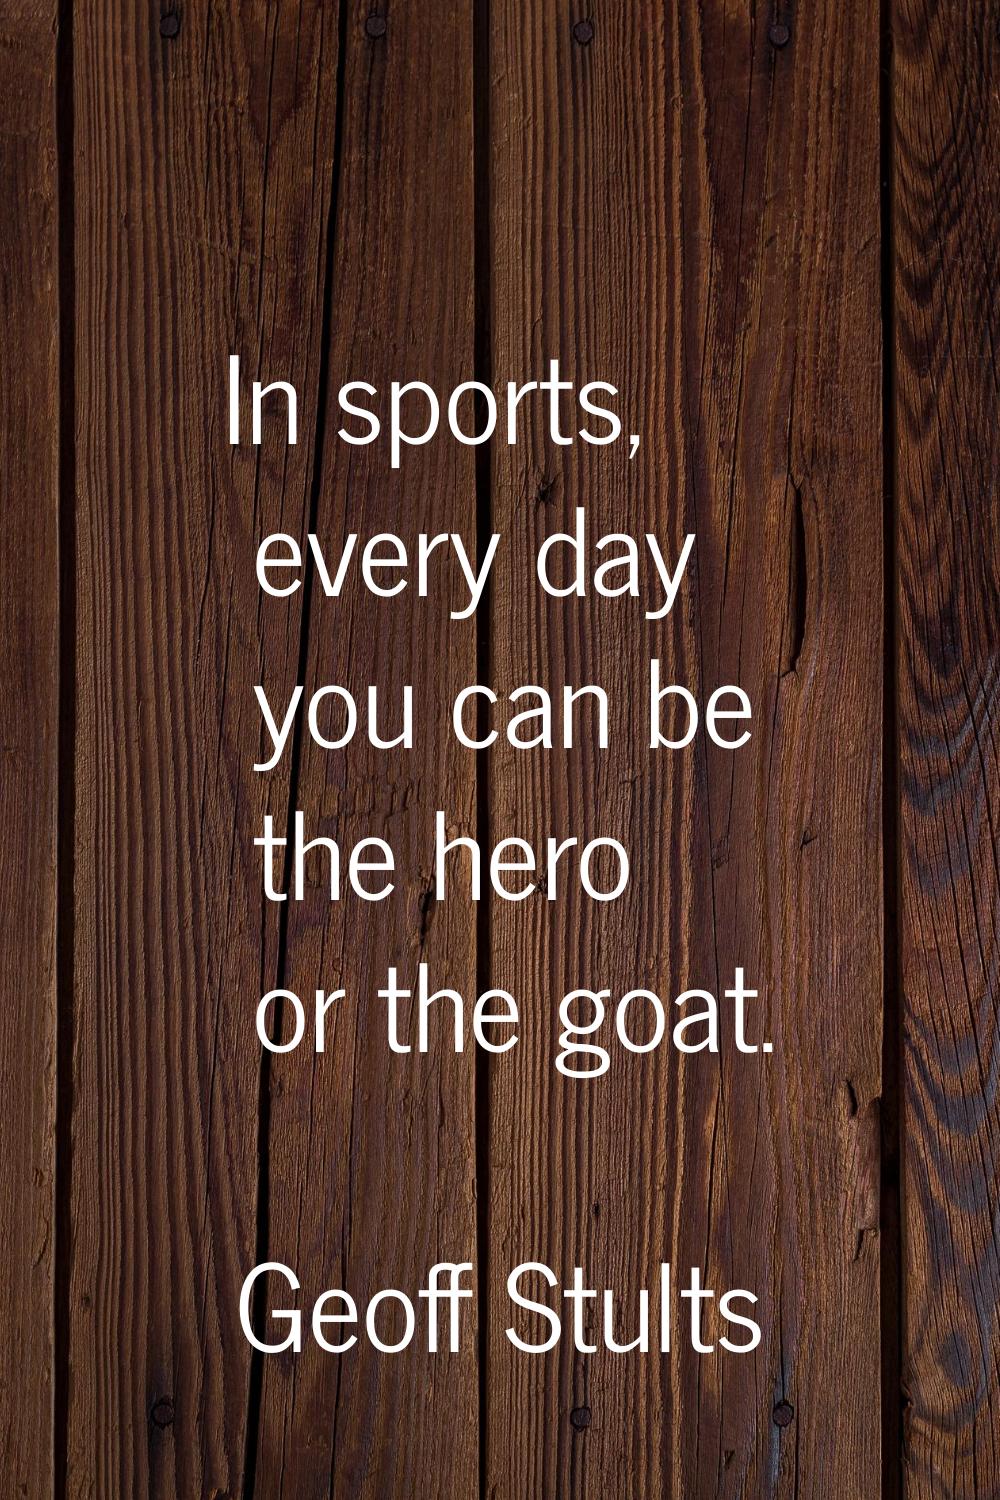 In sports, every day you can be the hero or the goat.